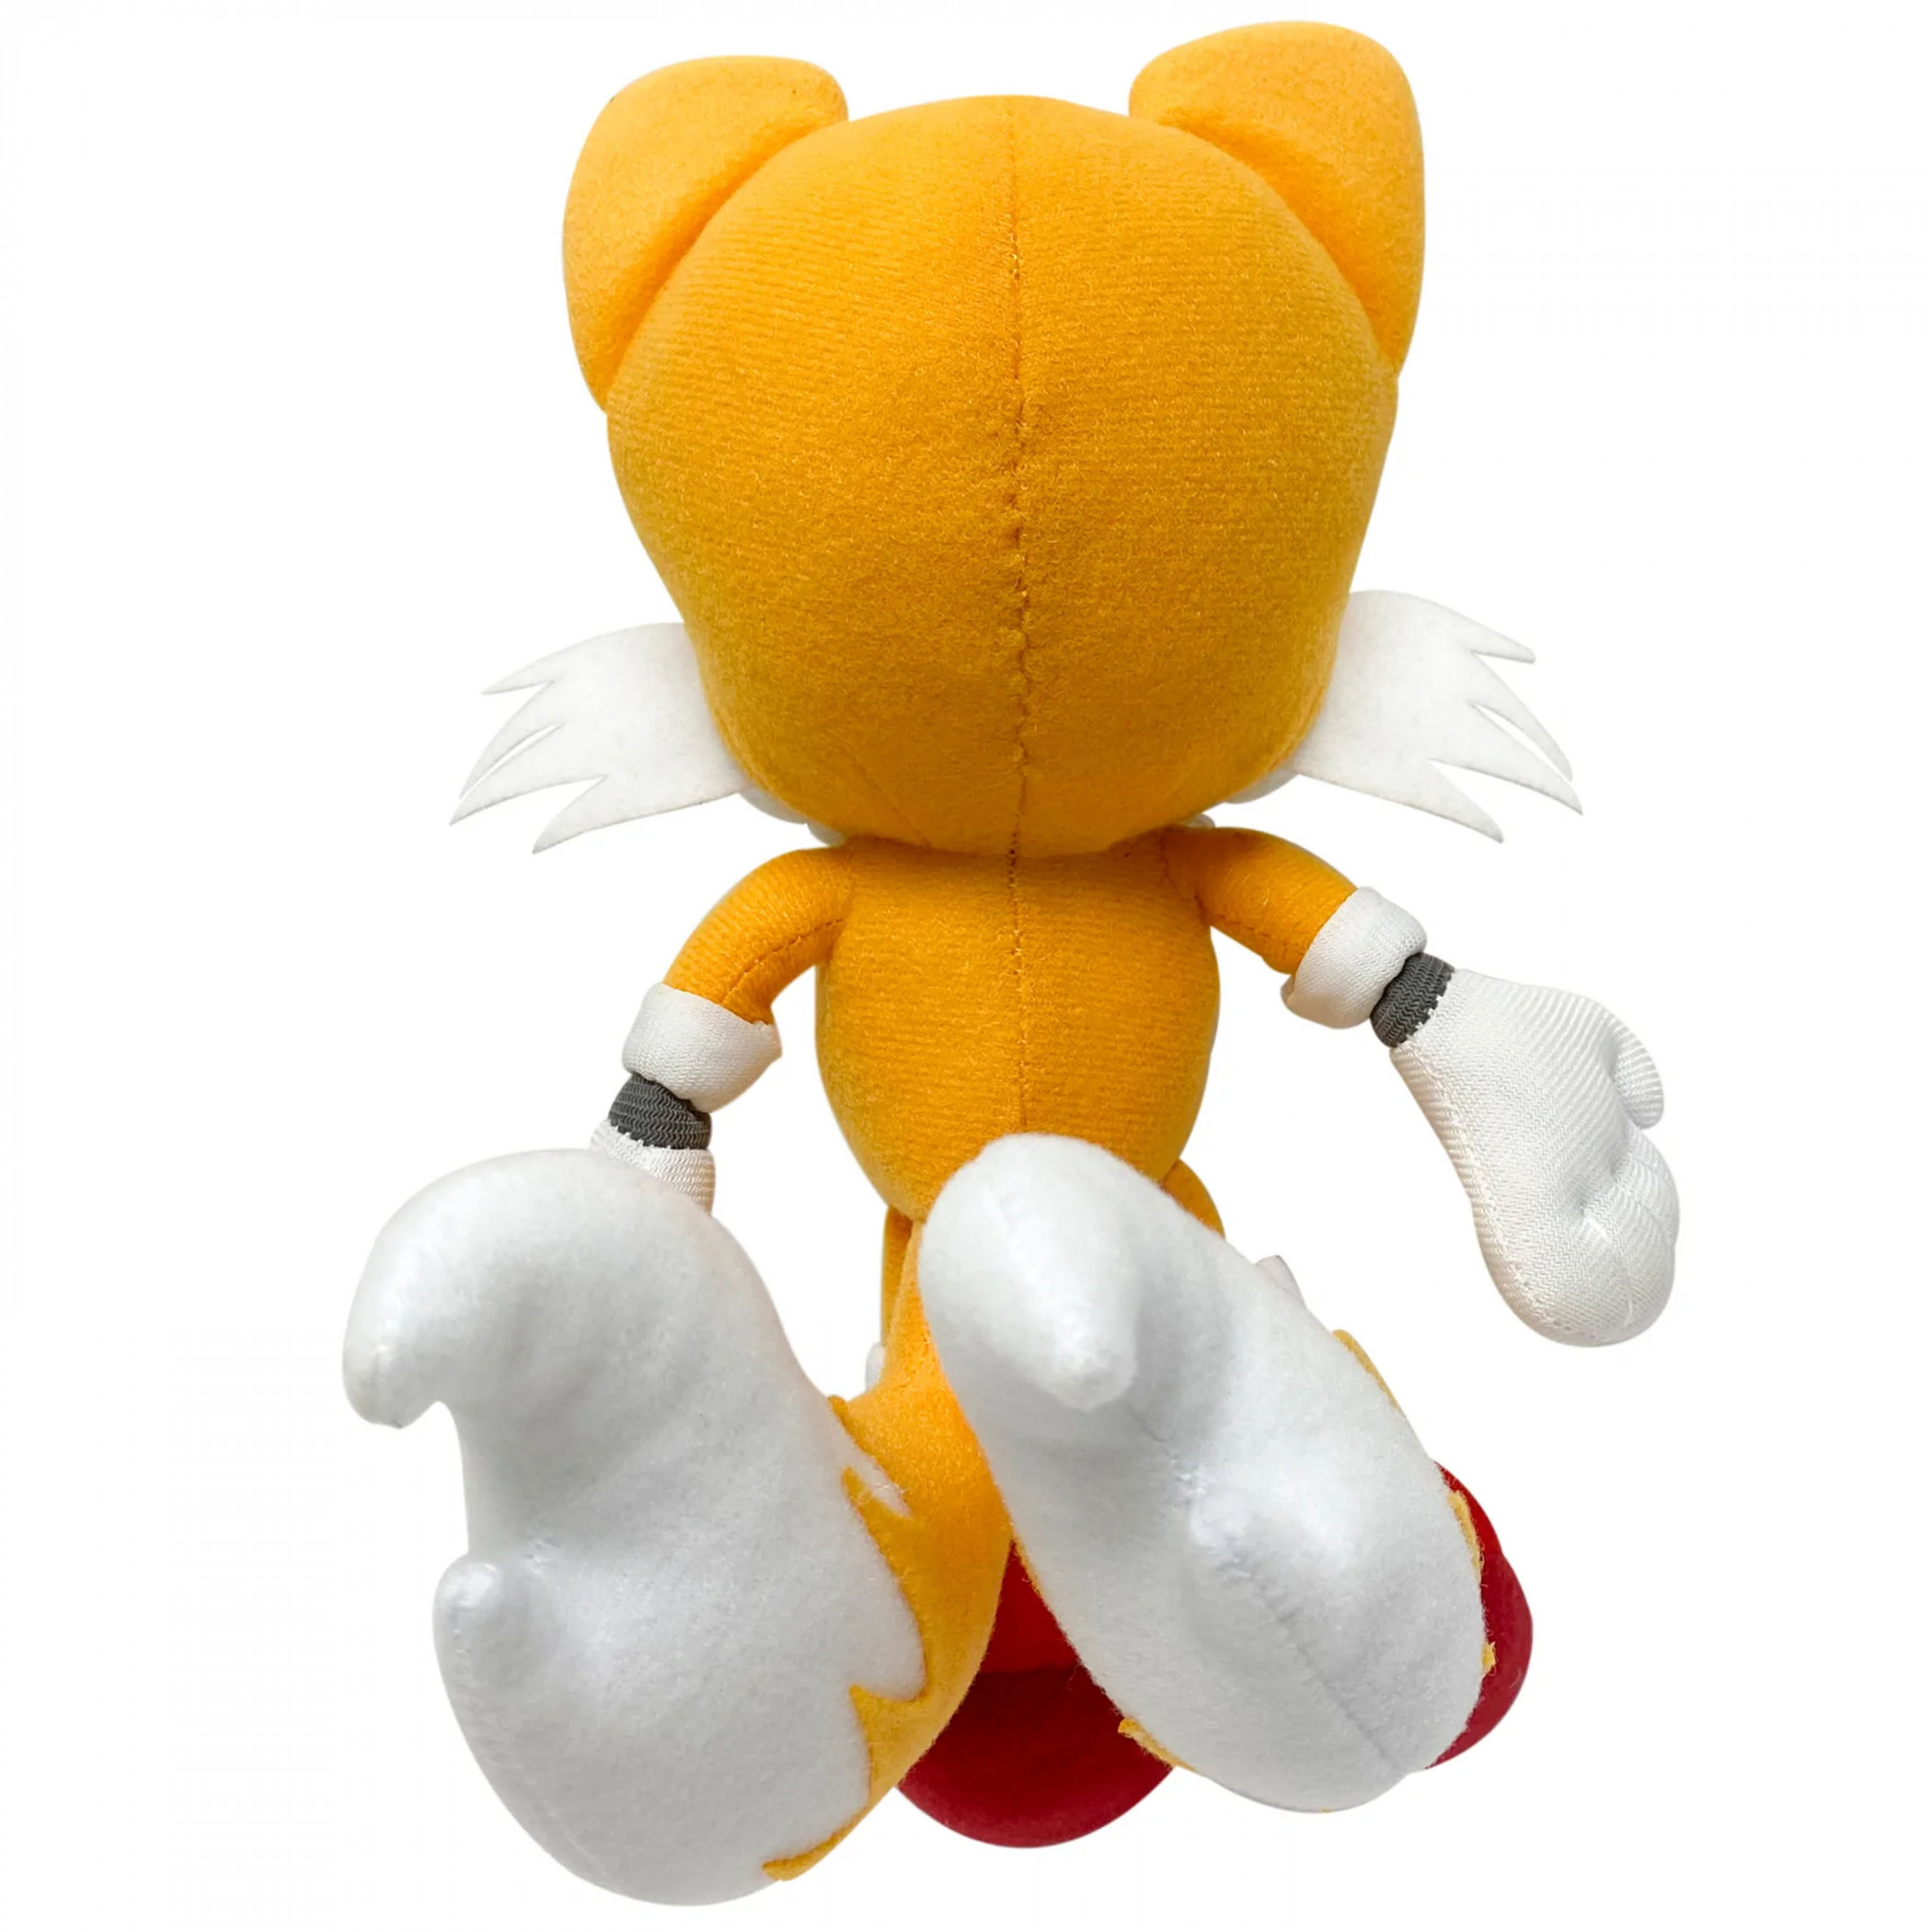 Tails Plush Toy